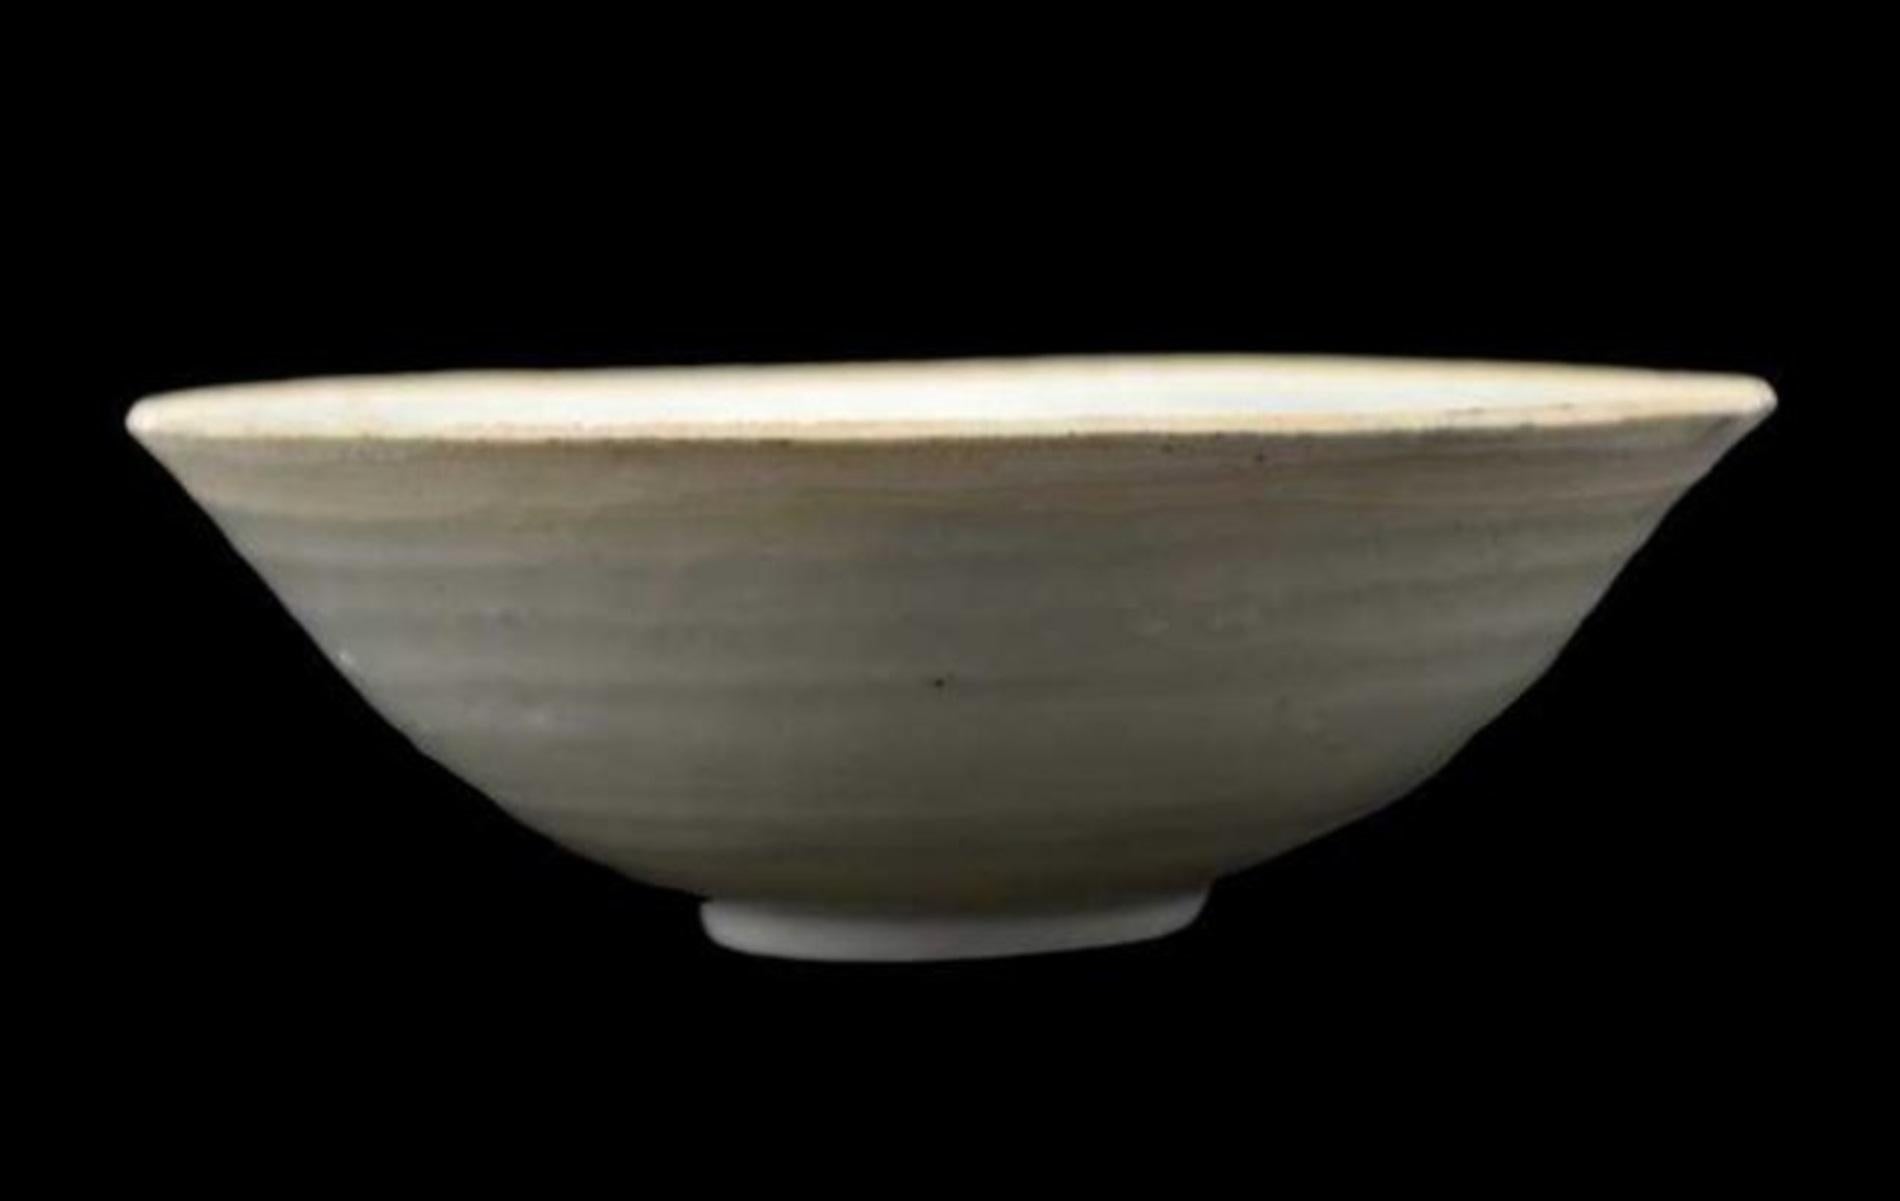 A fine rounded conical bowl
Chinese, Song dynasty, 12th-13th century
with twin fish motif in the well. Thinly potted translucent porcelain with unglazed rim and foot covered inside and out with a lavender blue gaze thinning to mushroom on the